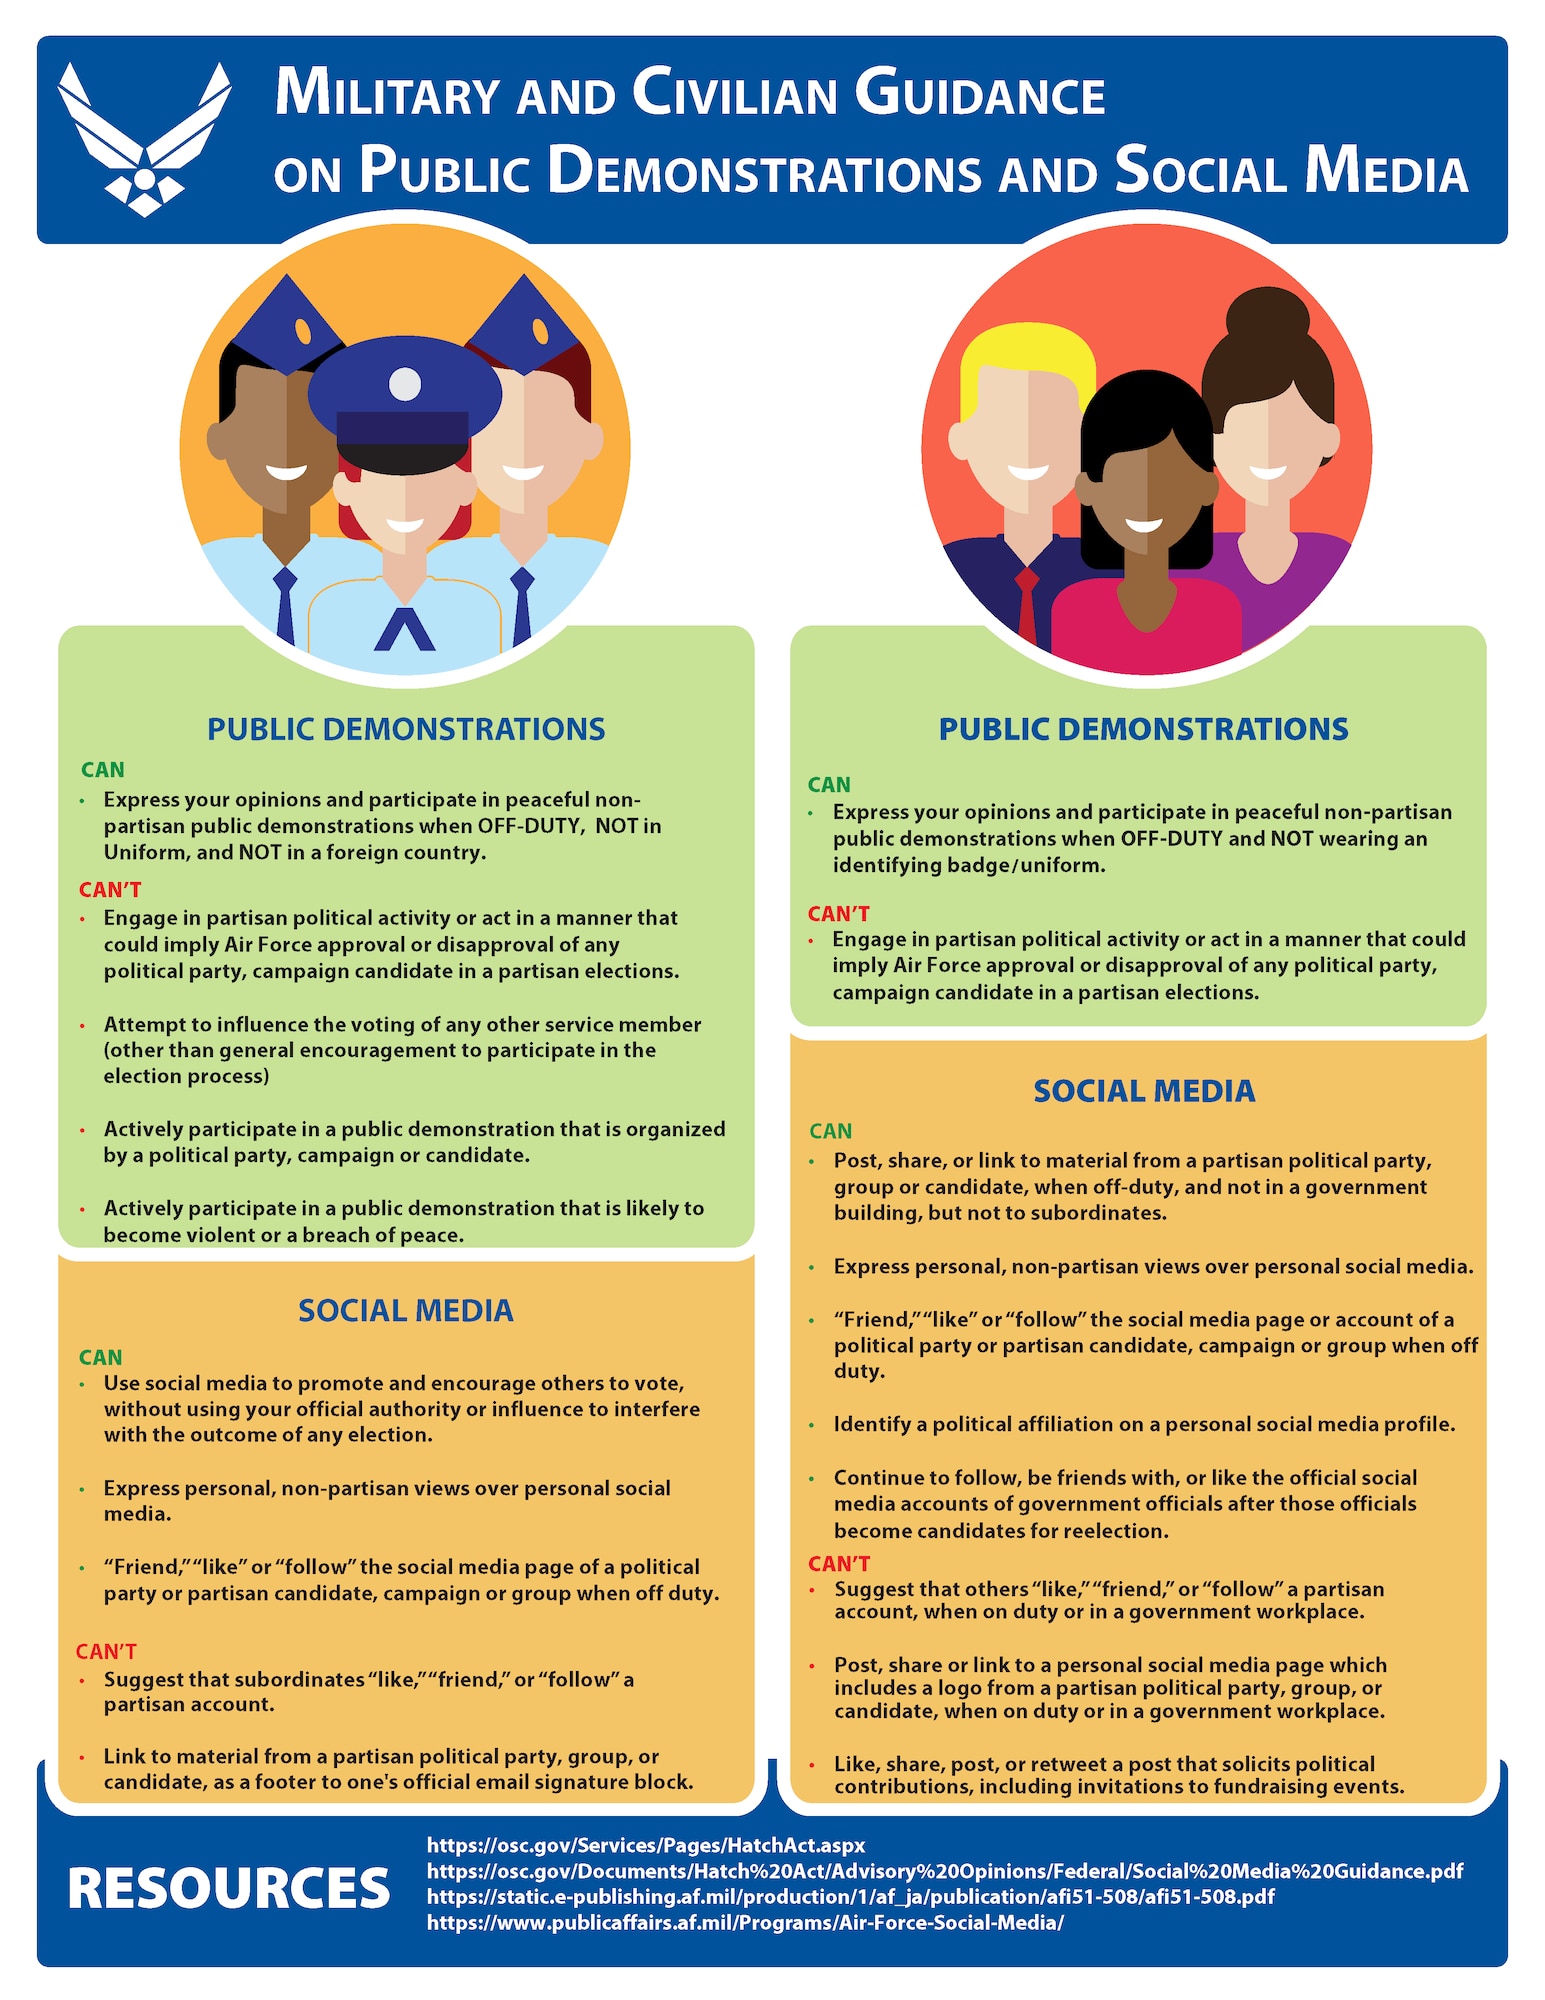 Military and Civilian Guidance on Public Demonstrations and Social Media infographic